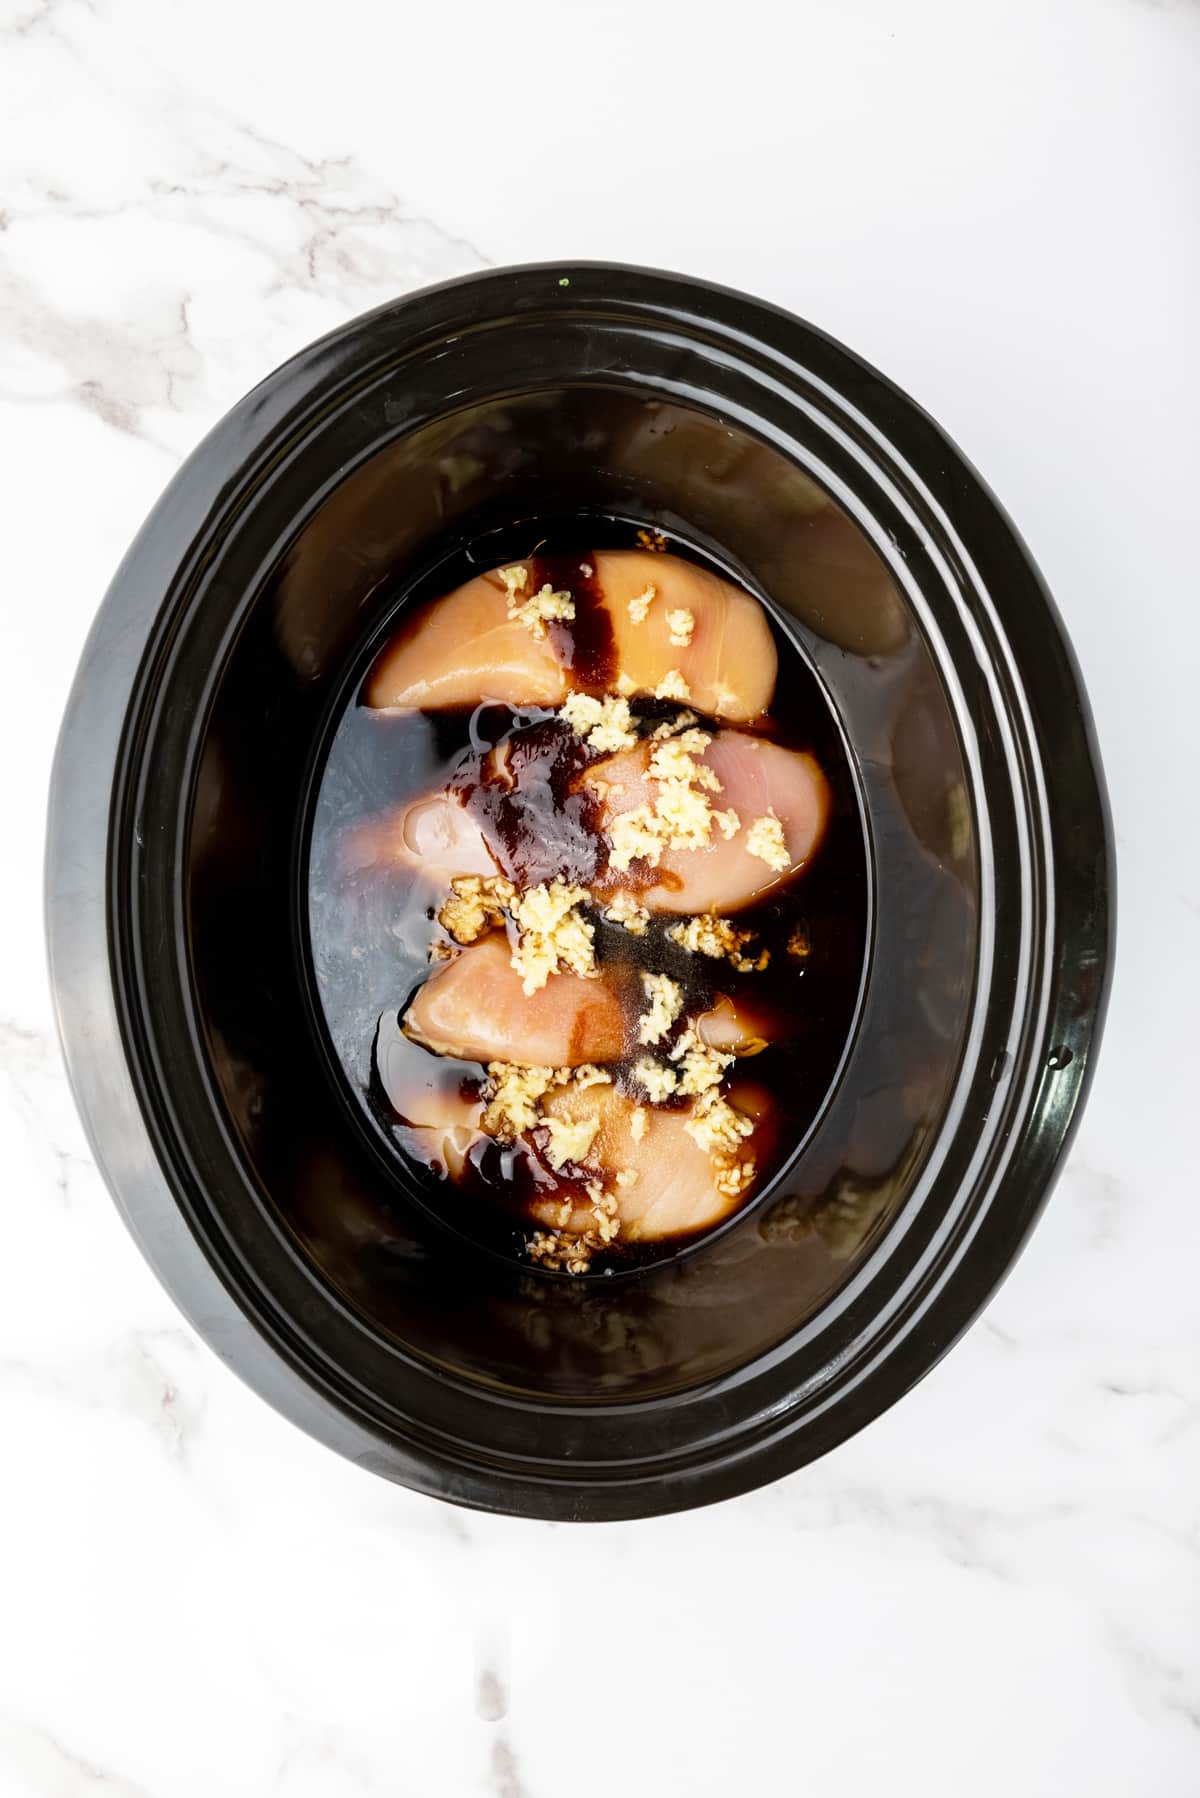 Four raw chicken breast fillets bathing in a savory, honey garlic sauce topped with minced garlic and placed in a slow cooker on top of a marble surface.